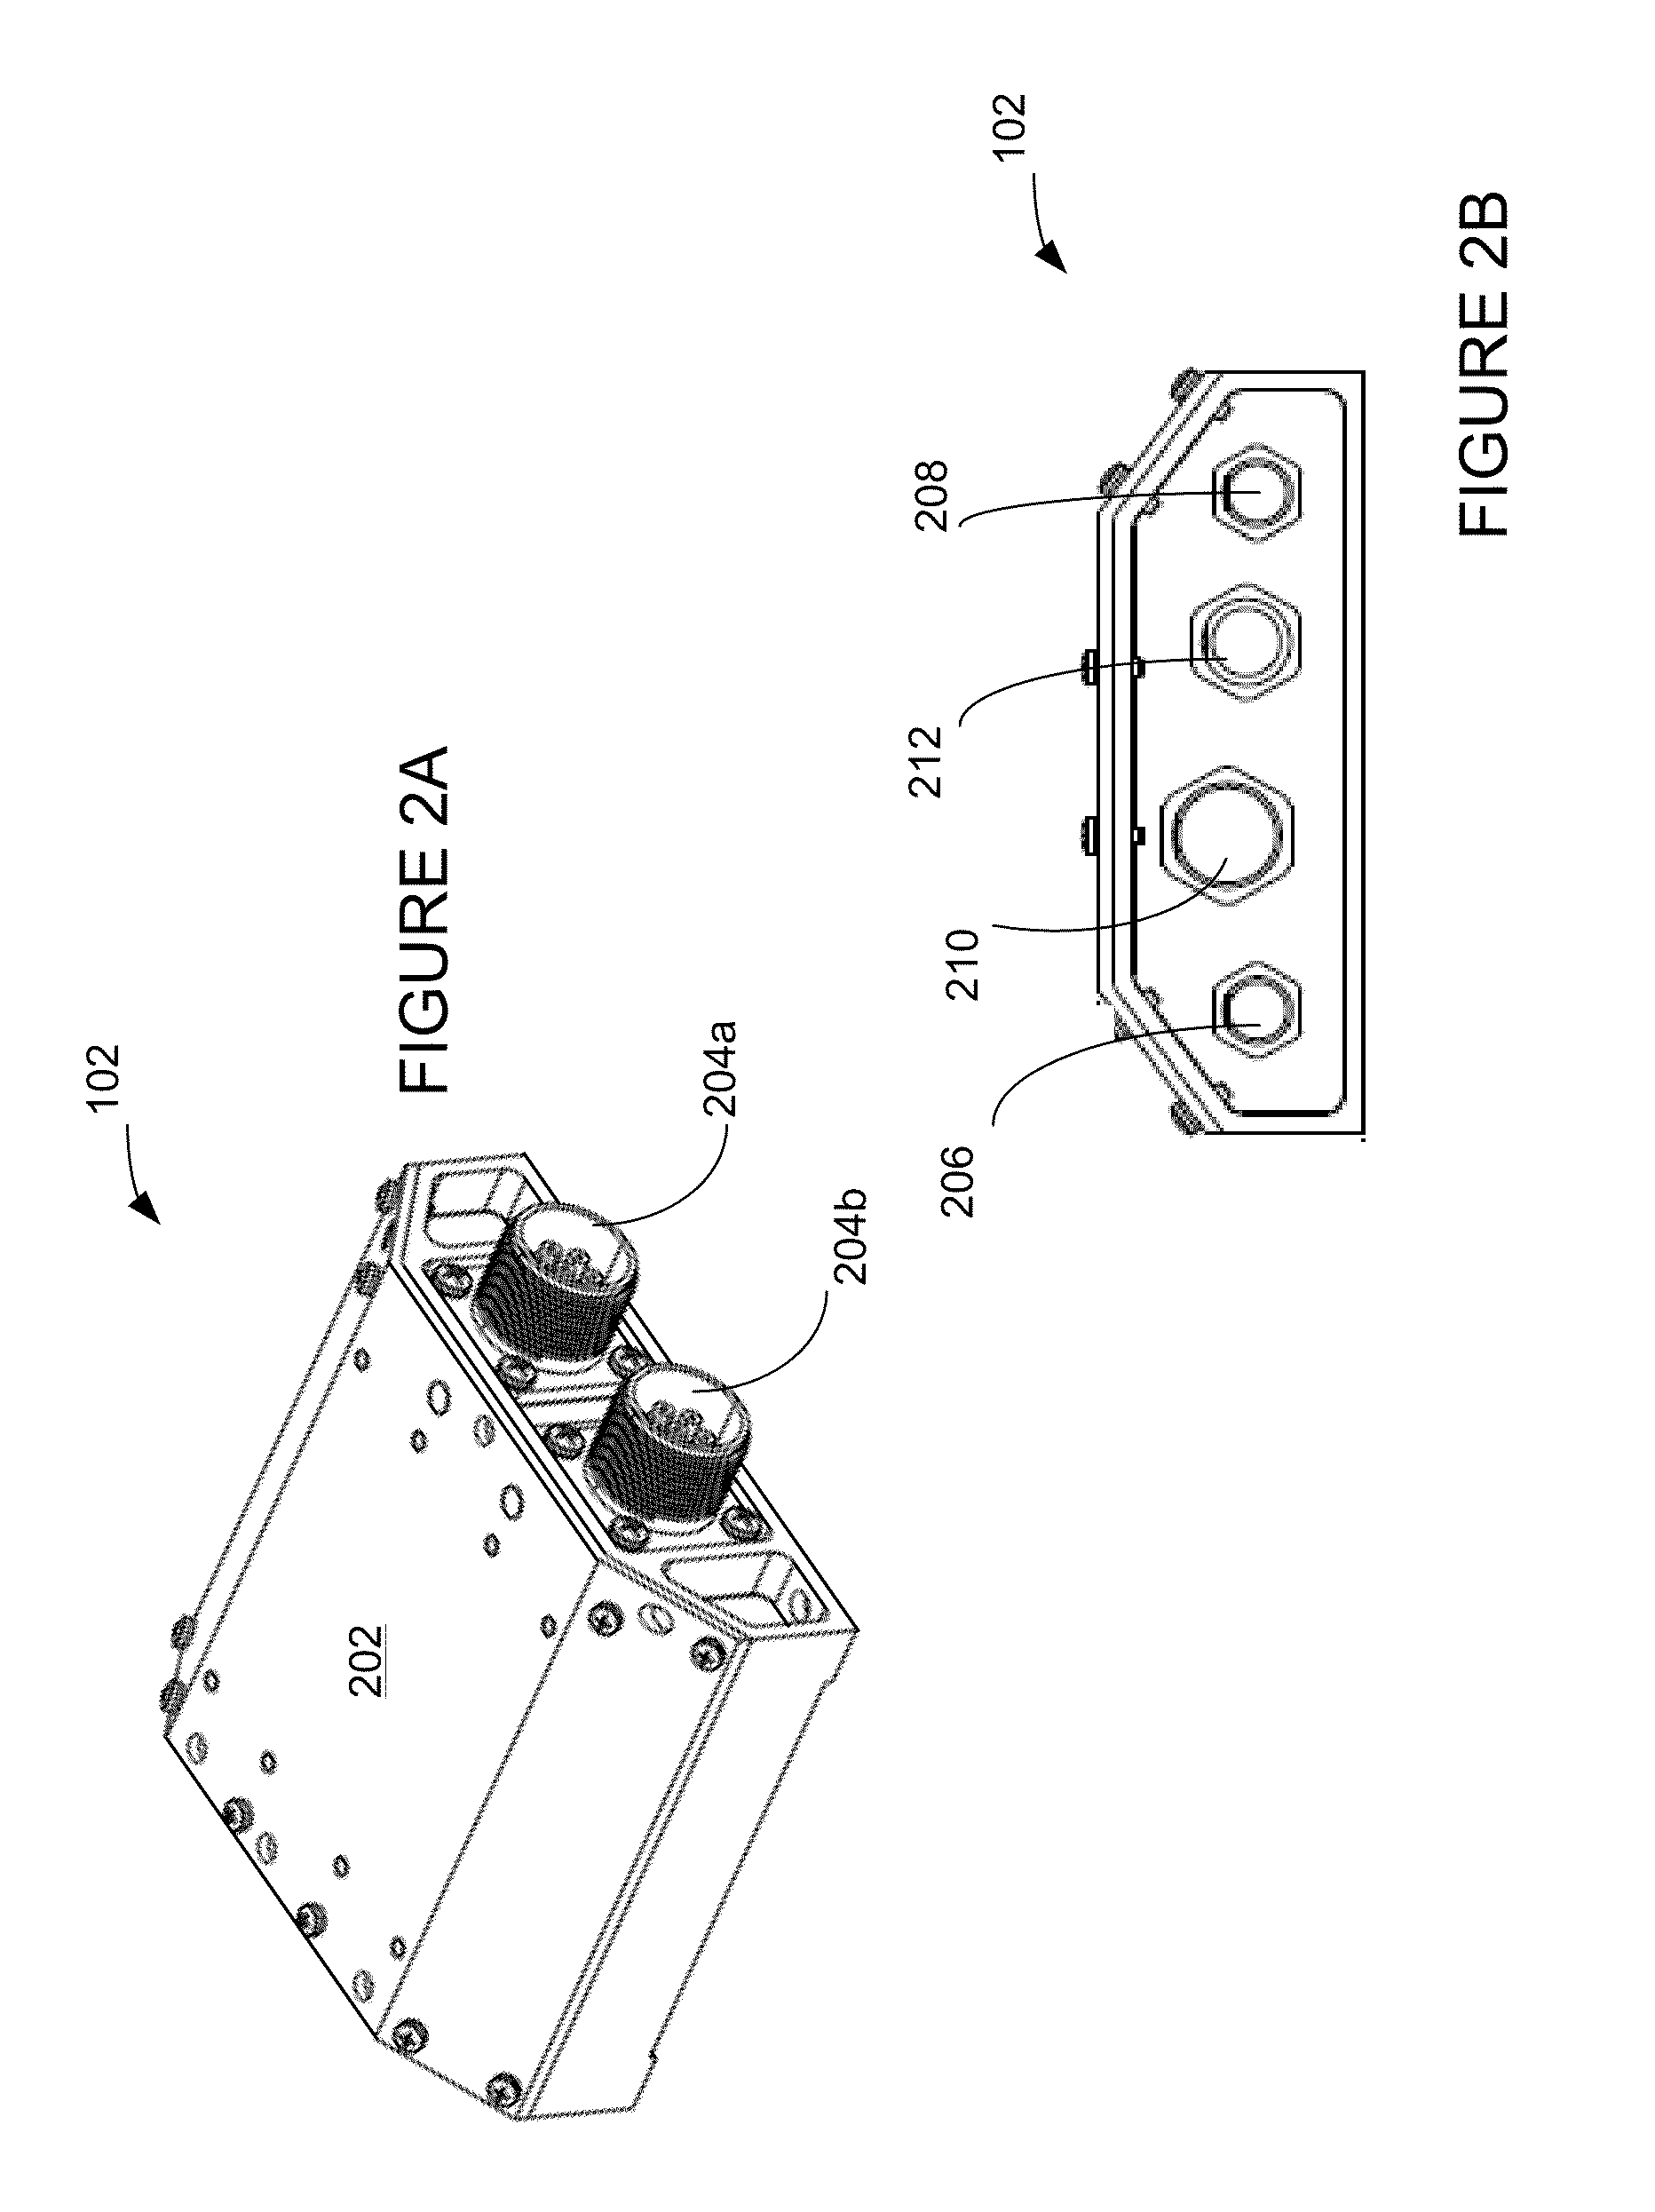 Electronic safe/arm system and methods of use thereof